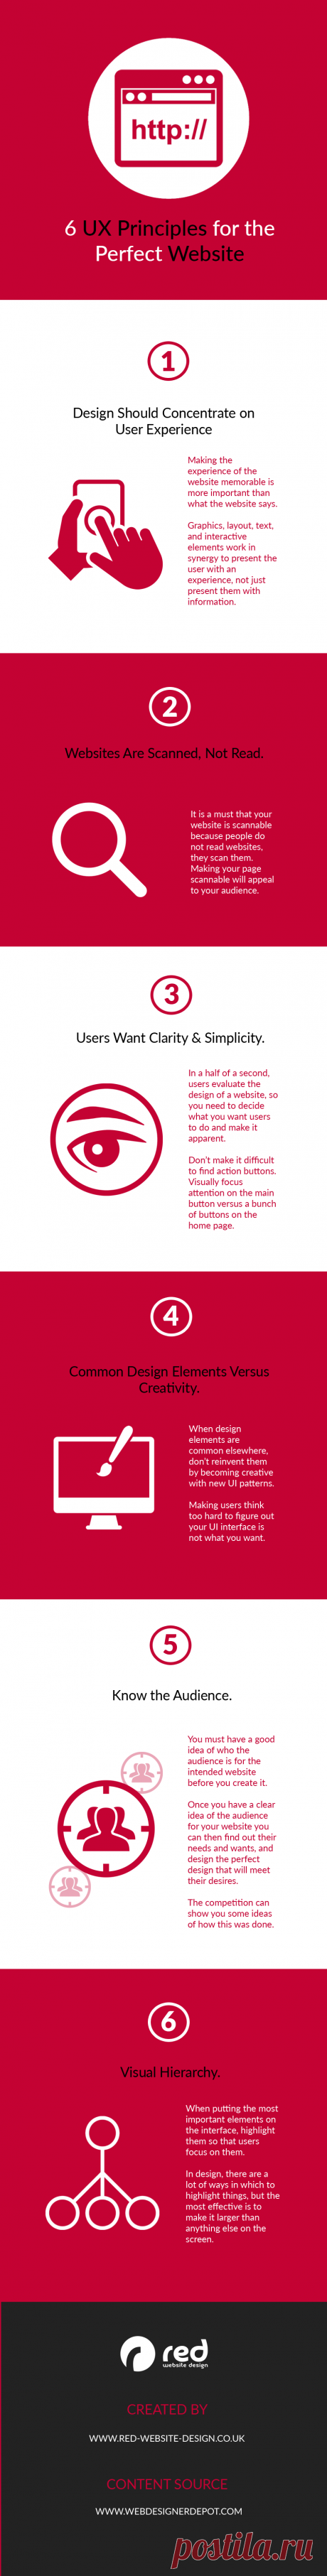 6 Design Principles for the Perfect Website 
Design should concentrate on user experience
Websites are scanned, not read
Users want clarity and simplicity
Common design elements versus creativity
Know the audience
Visual hierarchy